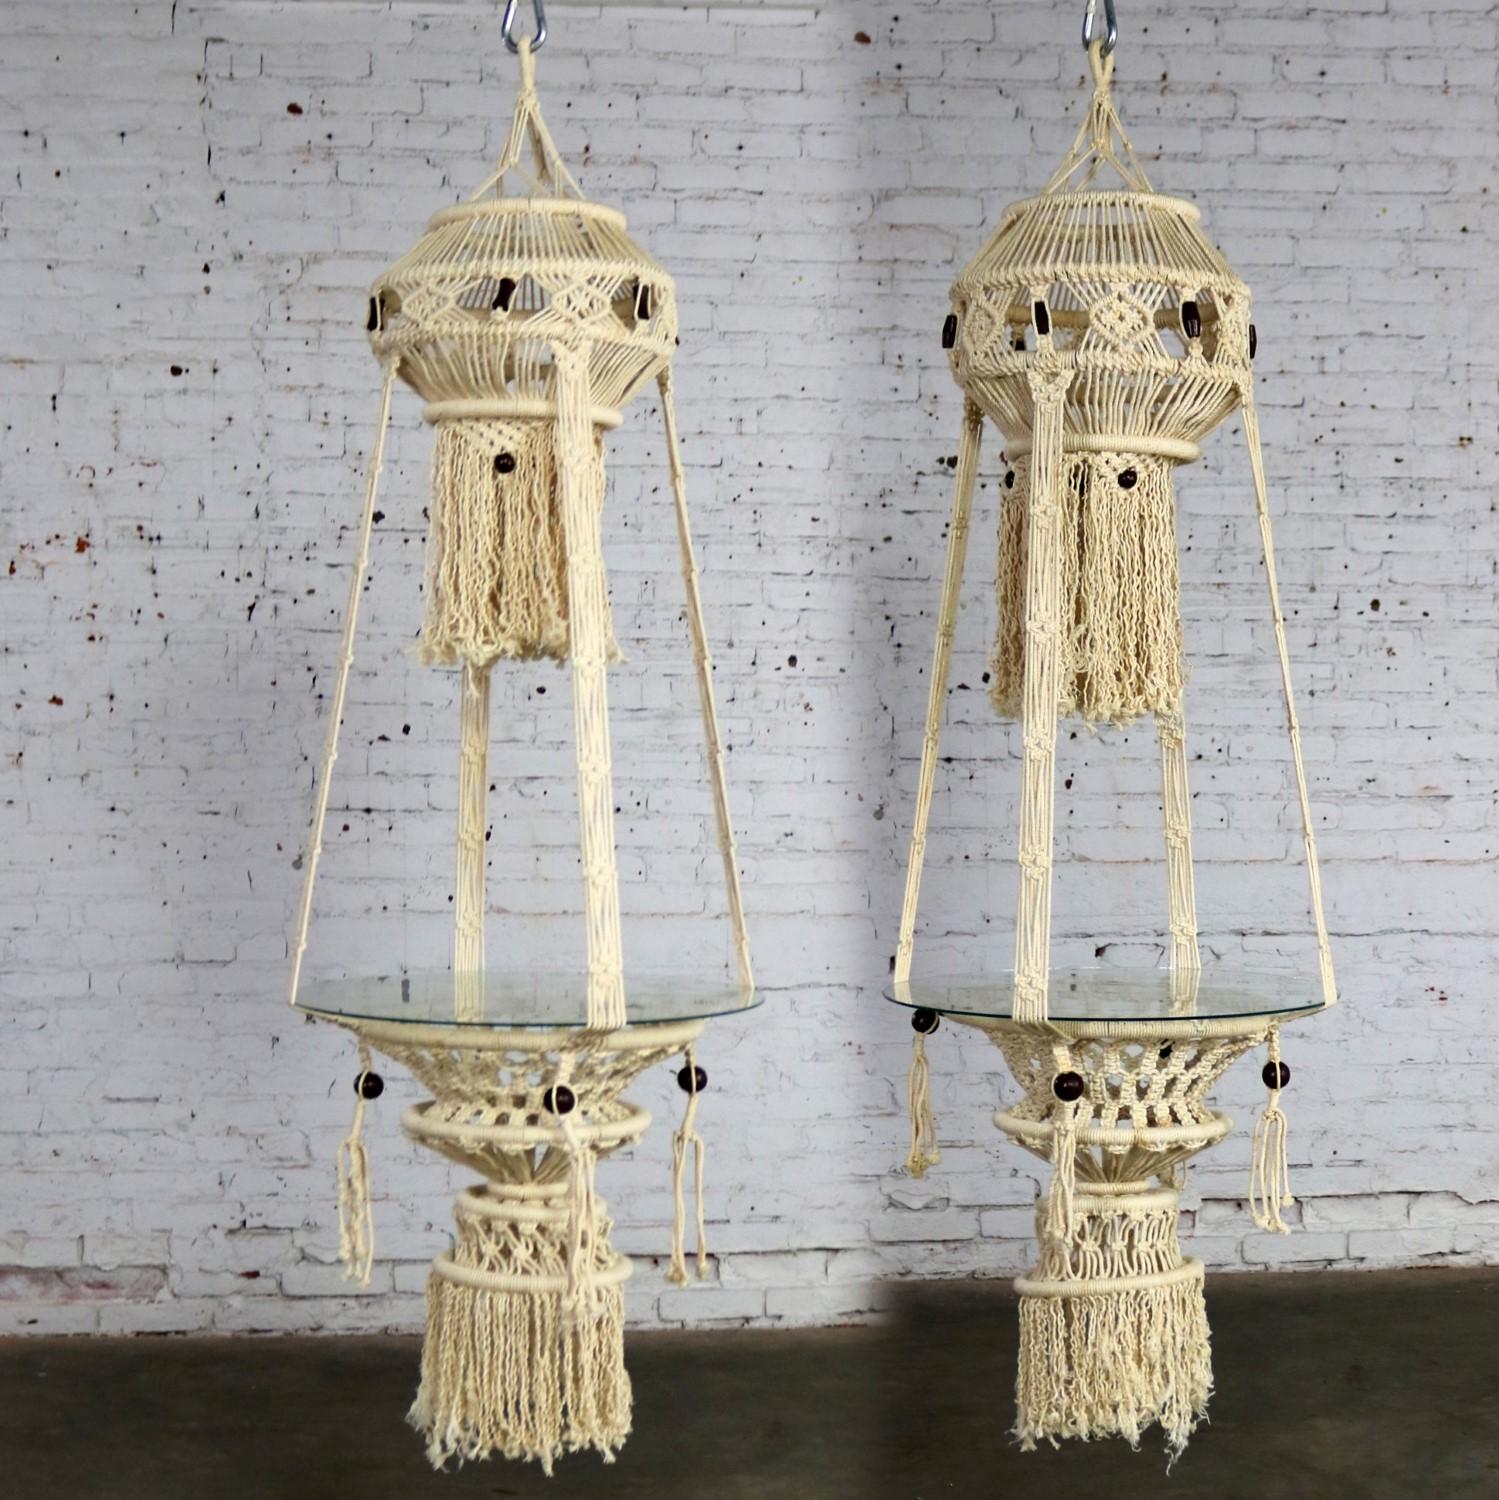 Beautiful pair of white cord macramé hanging tables with round glass tops. They are in wonderful age appropriate condition but not without minor flaws which do not take away from their overall look. Please examine photos, circa 1960s-1970s.

What an